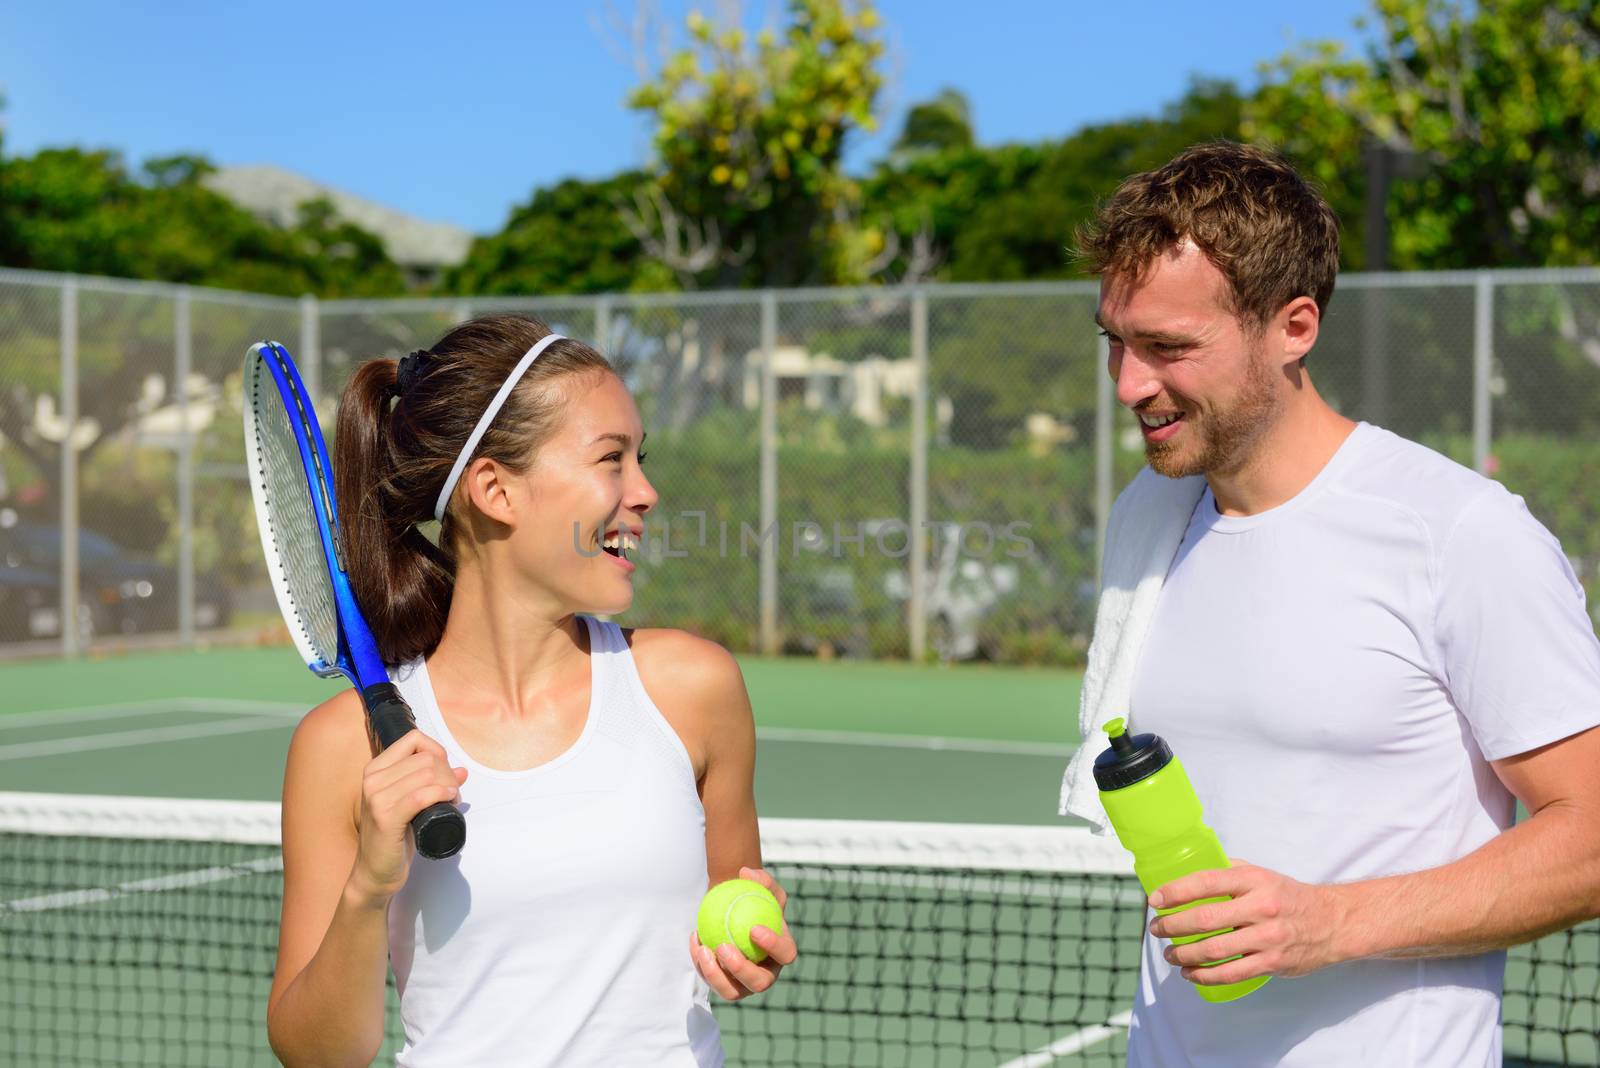 Tennis sport - couple relaxing after playing game by Maridav